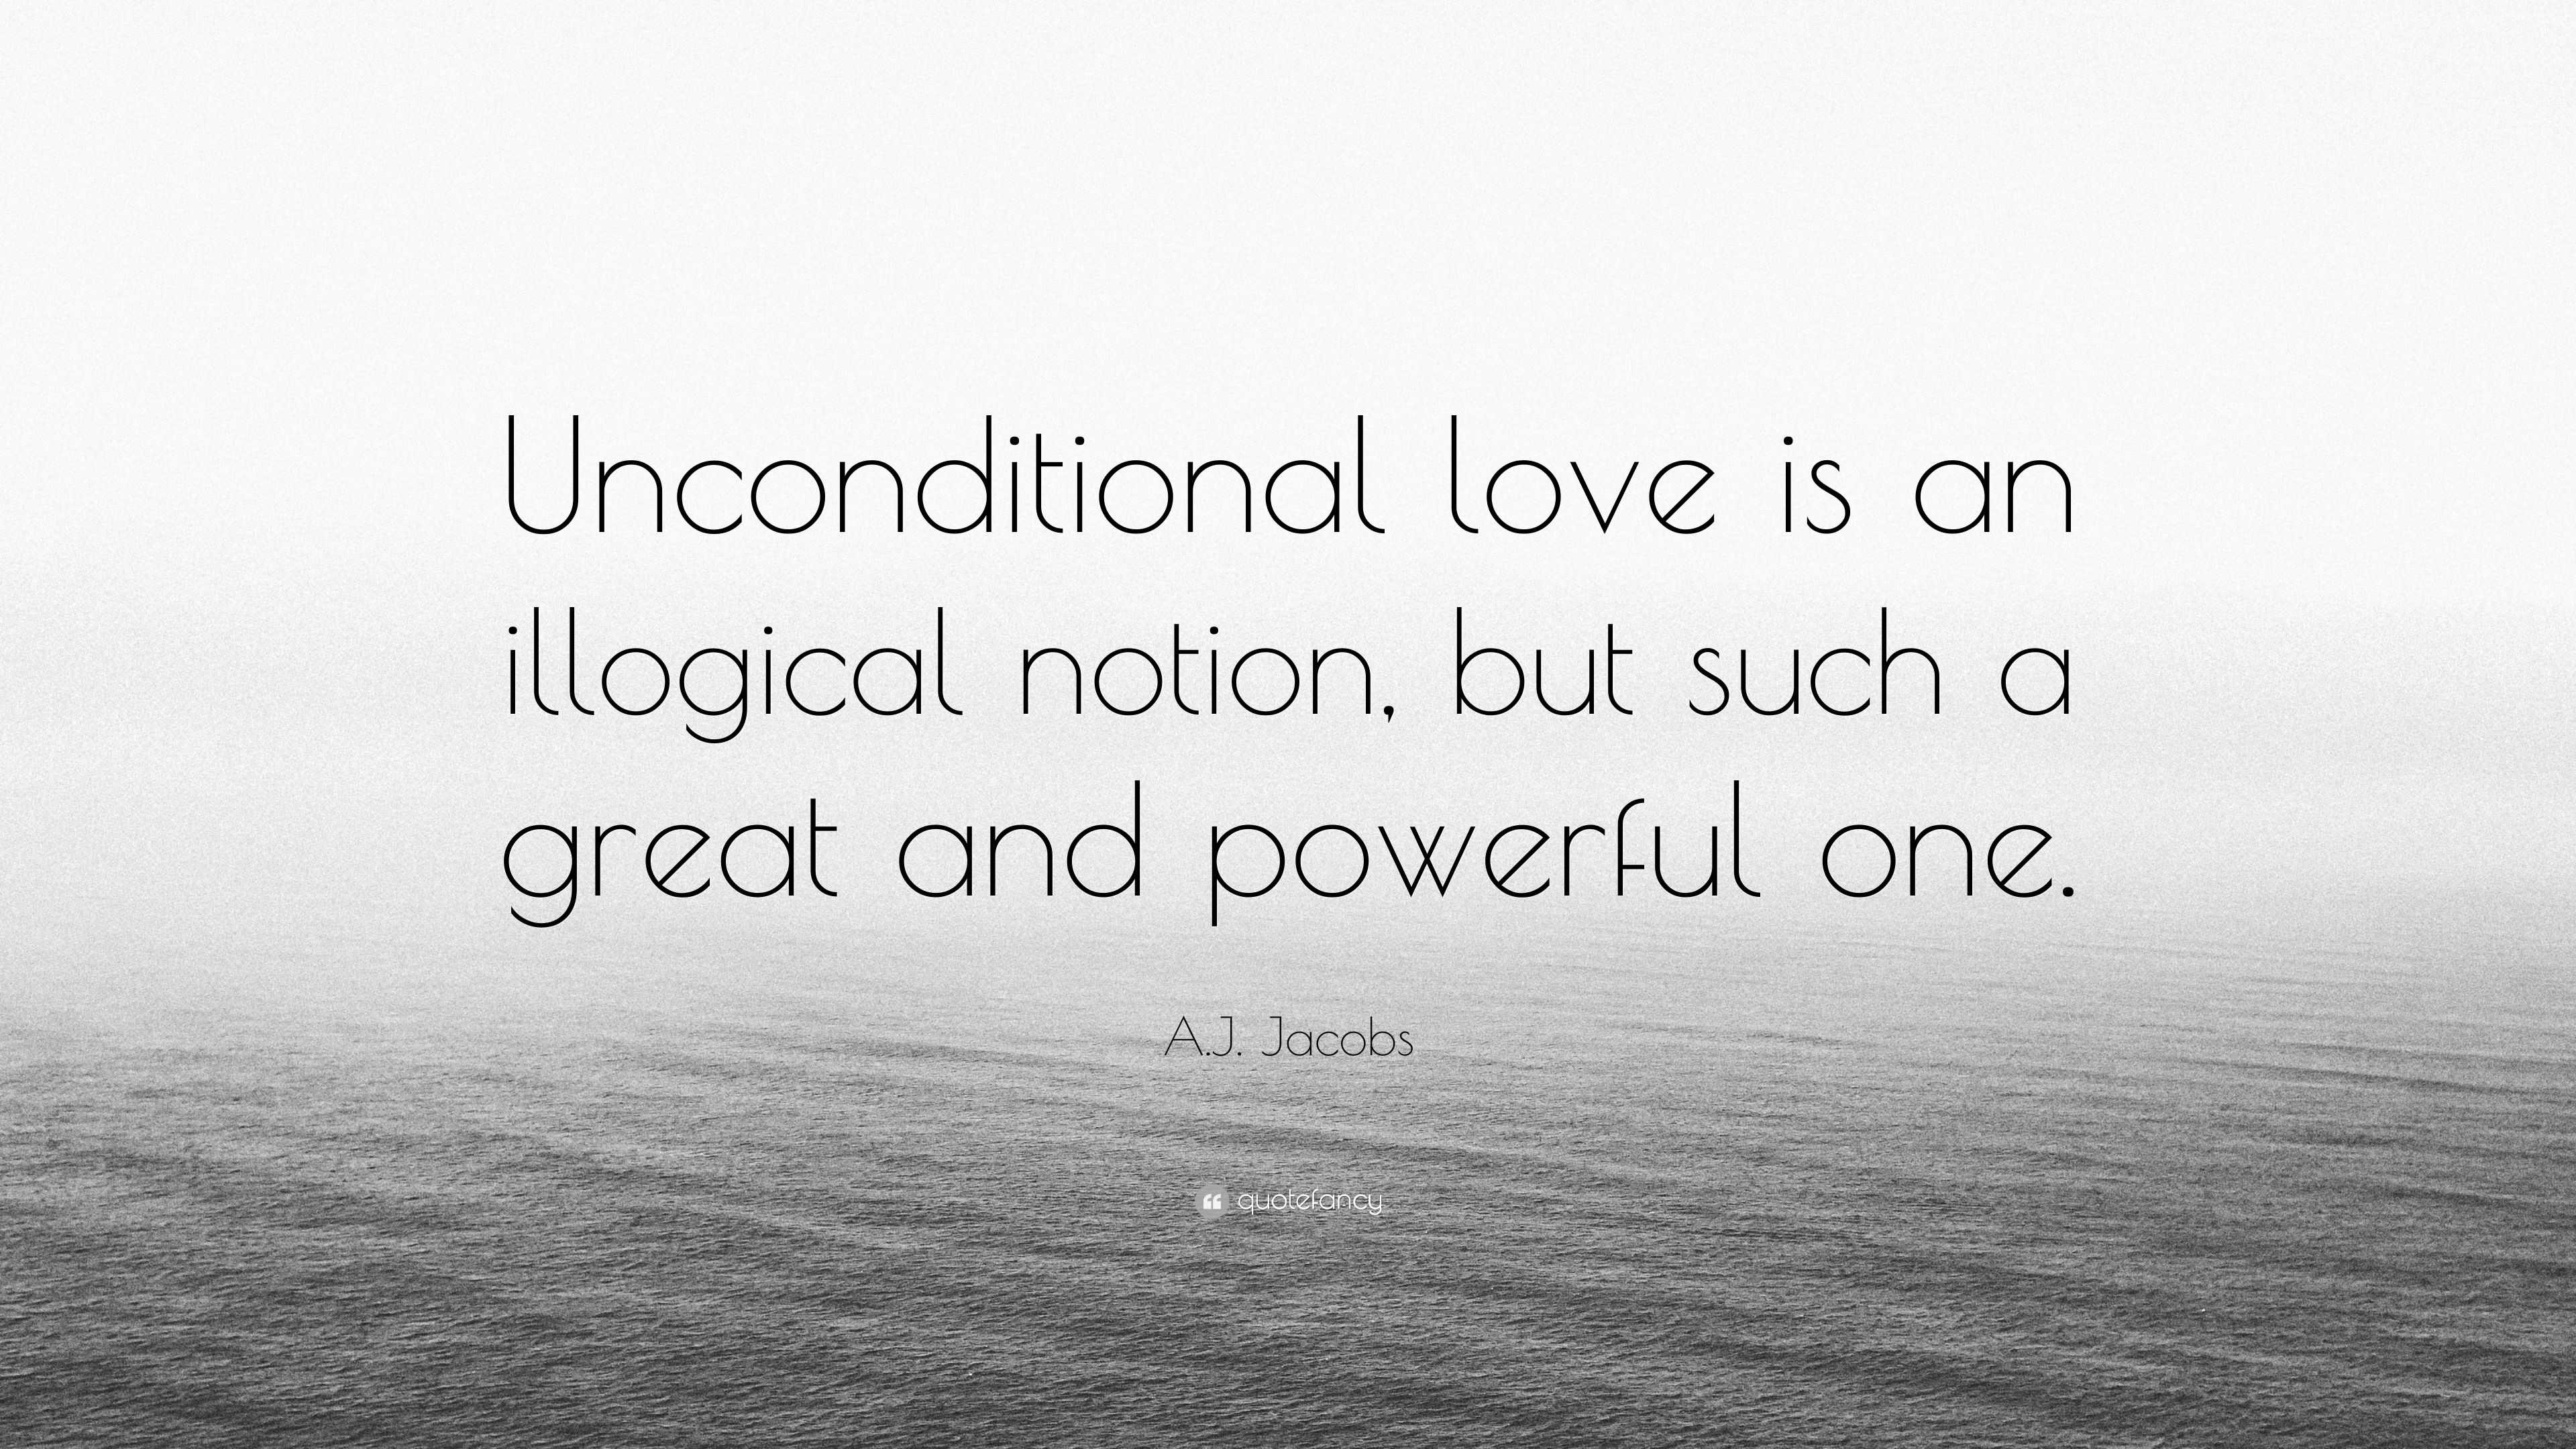 A.J. Jacobs Quote: “Unconditional love is an illogical notion, but such